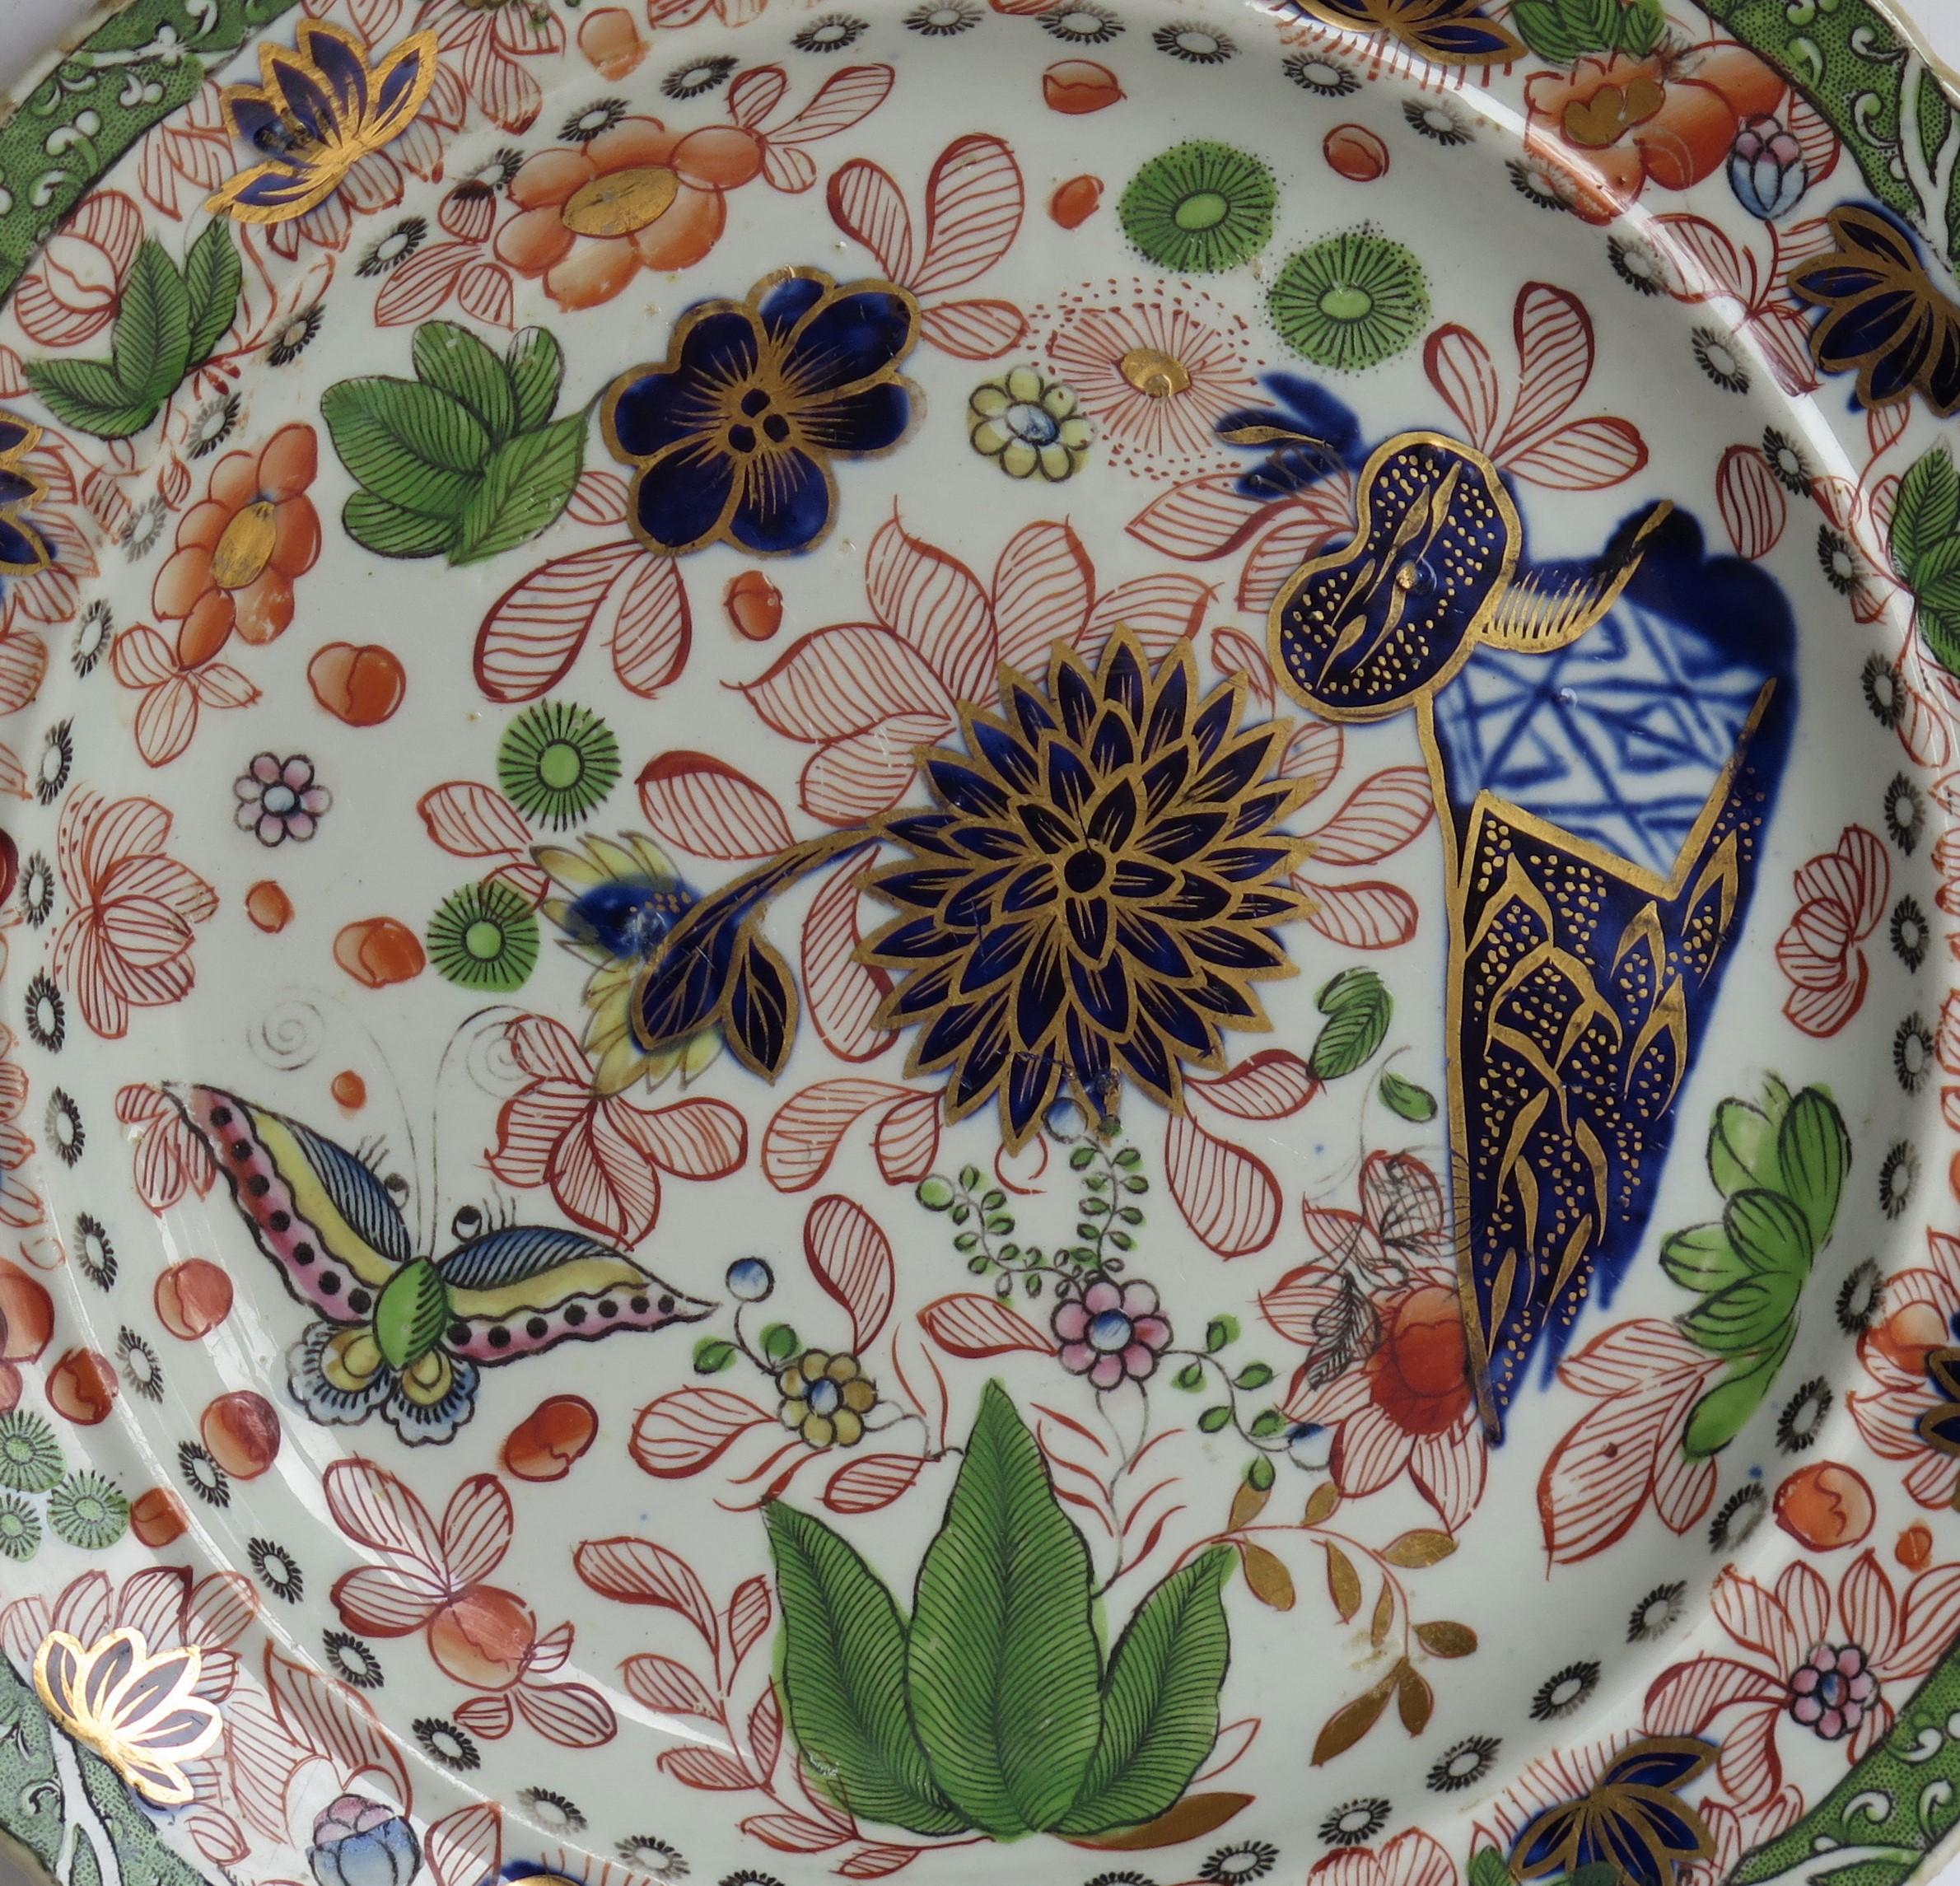 This is a fine ironstone pottery side plate made by the Mason's factory at Lane Delph, Staffordshire, England and beautifully hand decorated in the Butterfly & Mazarine Chrysanthemum Pattern, fully stamped and dating to the earliest period of